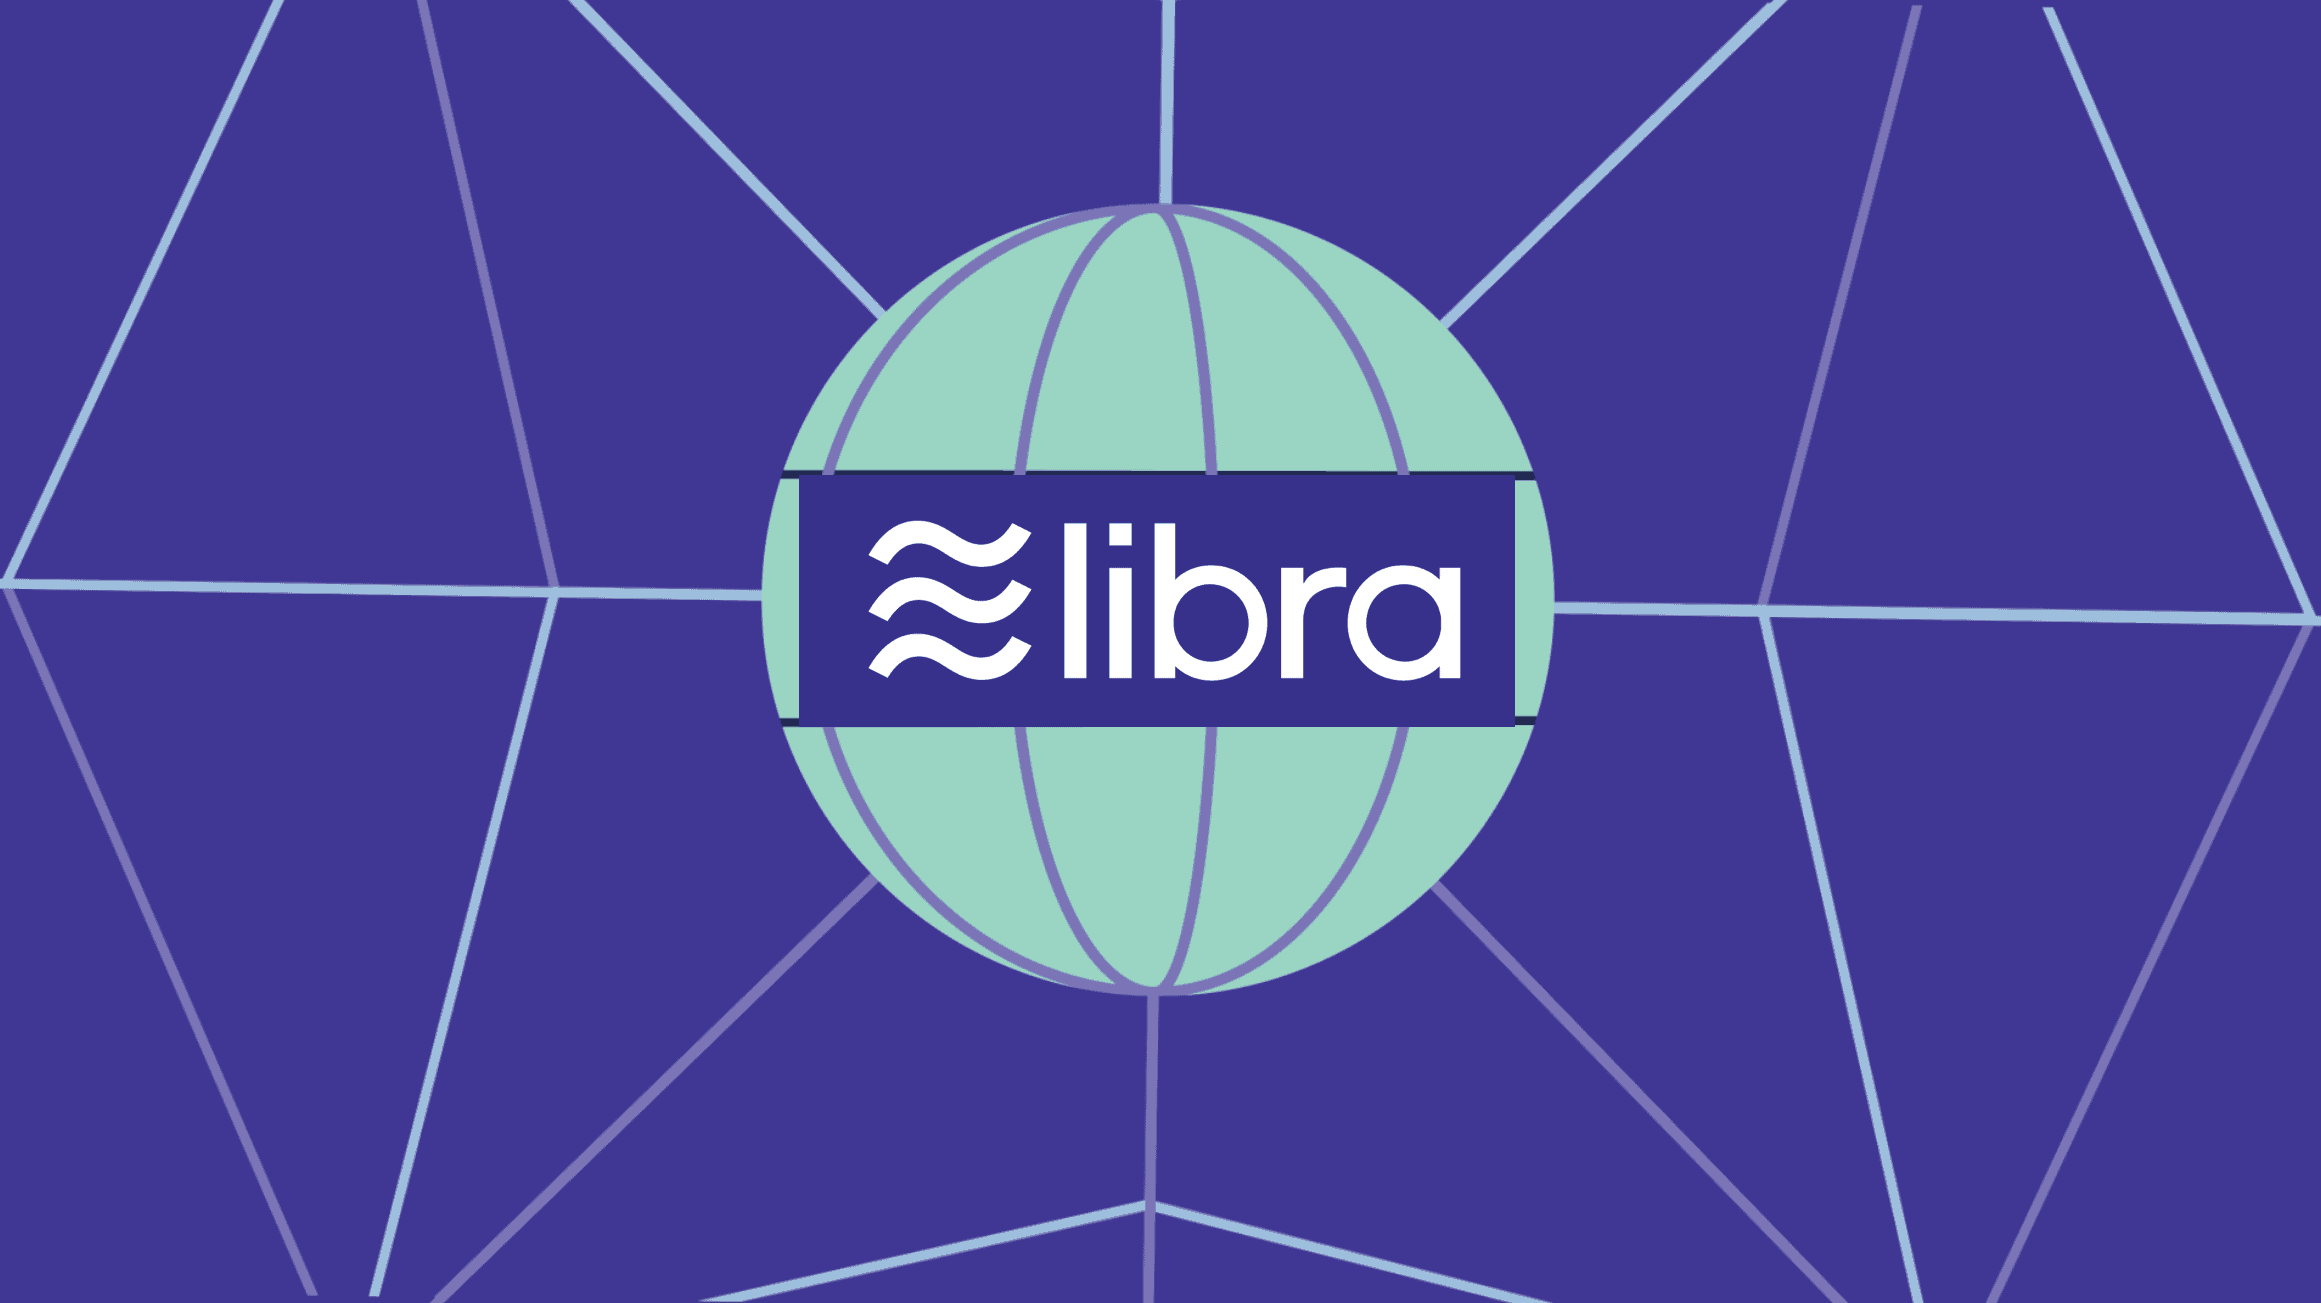 House Lawmakers Request Facebook to Put Libra on Hold